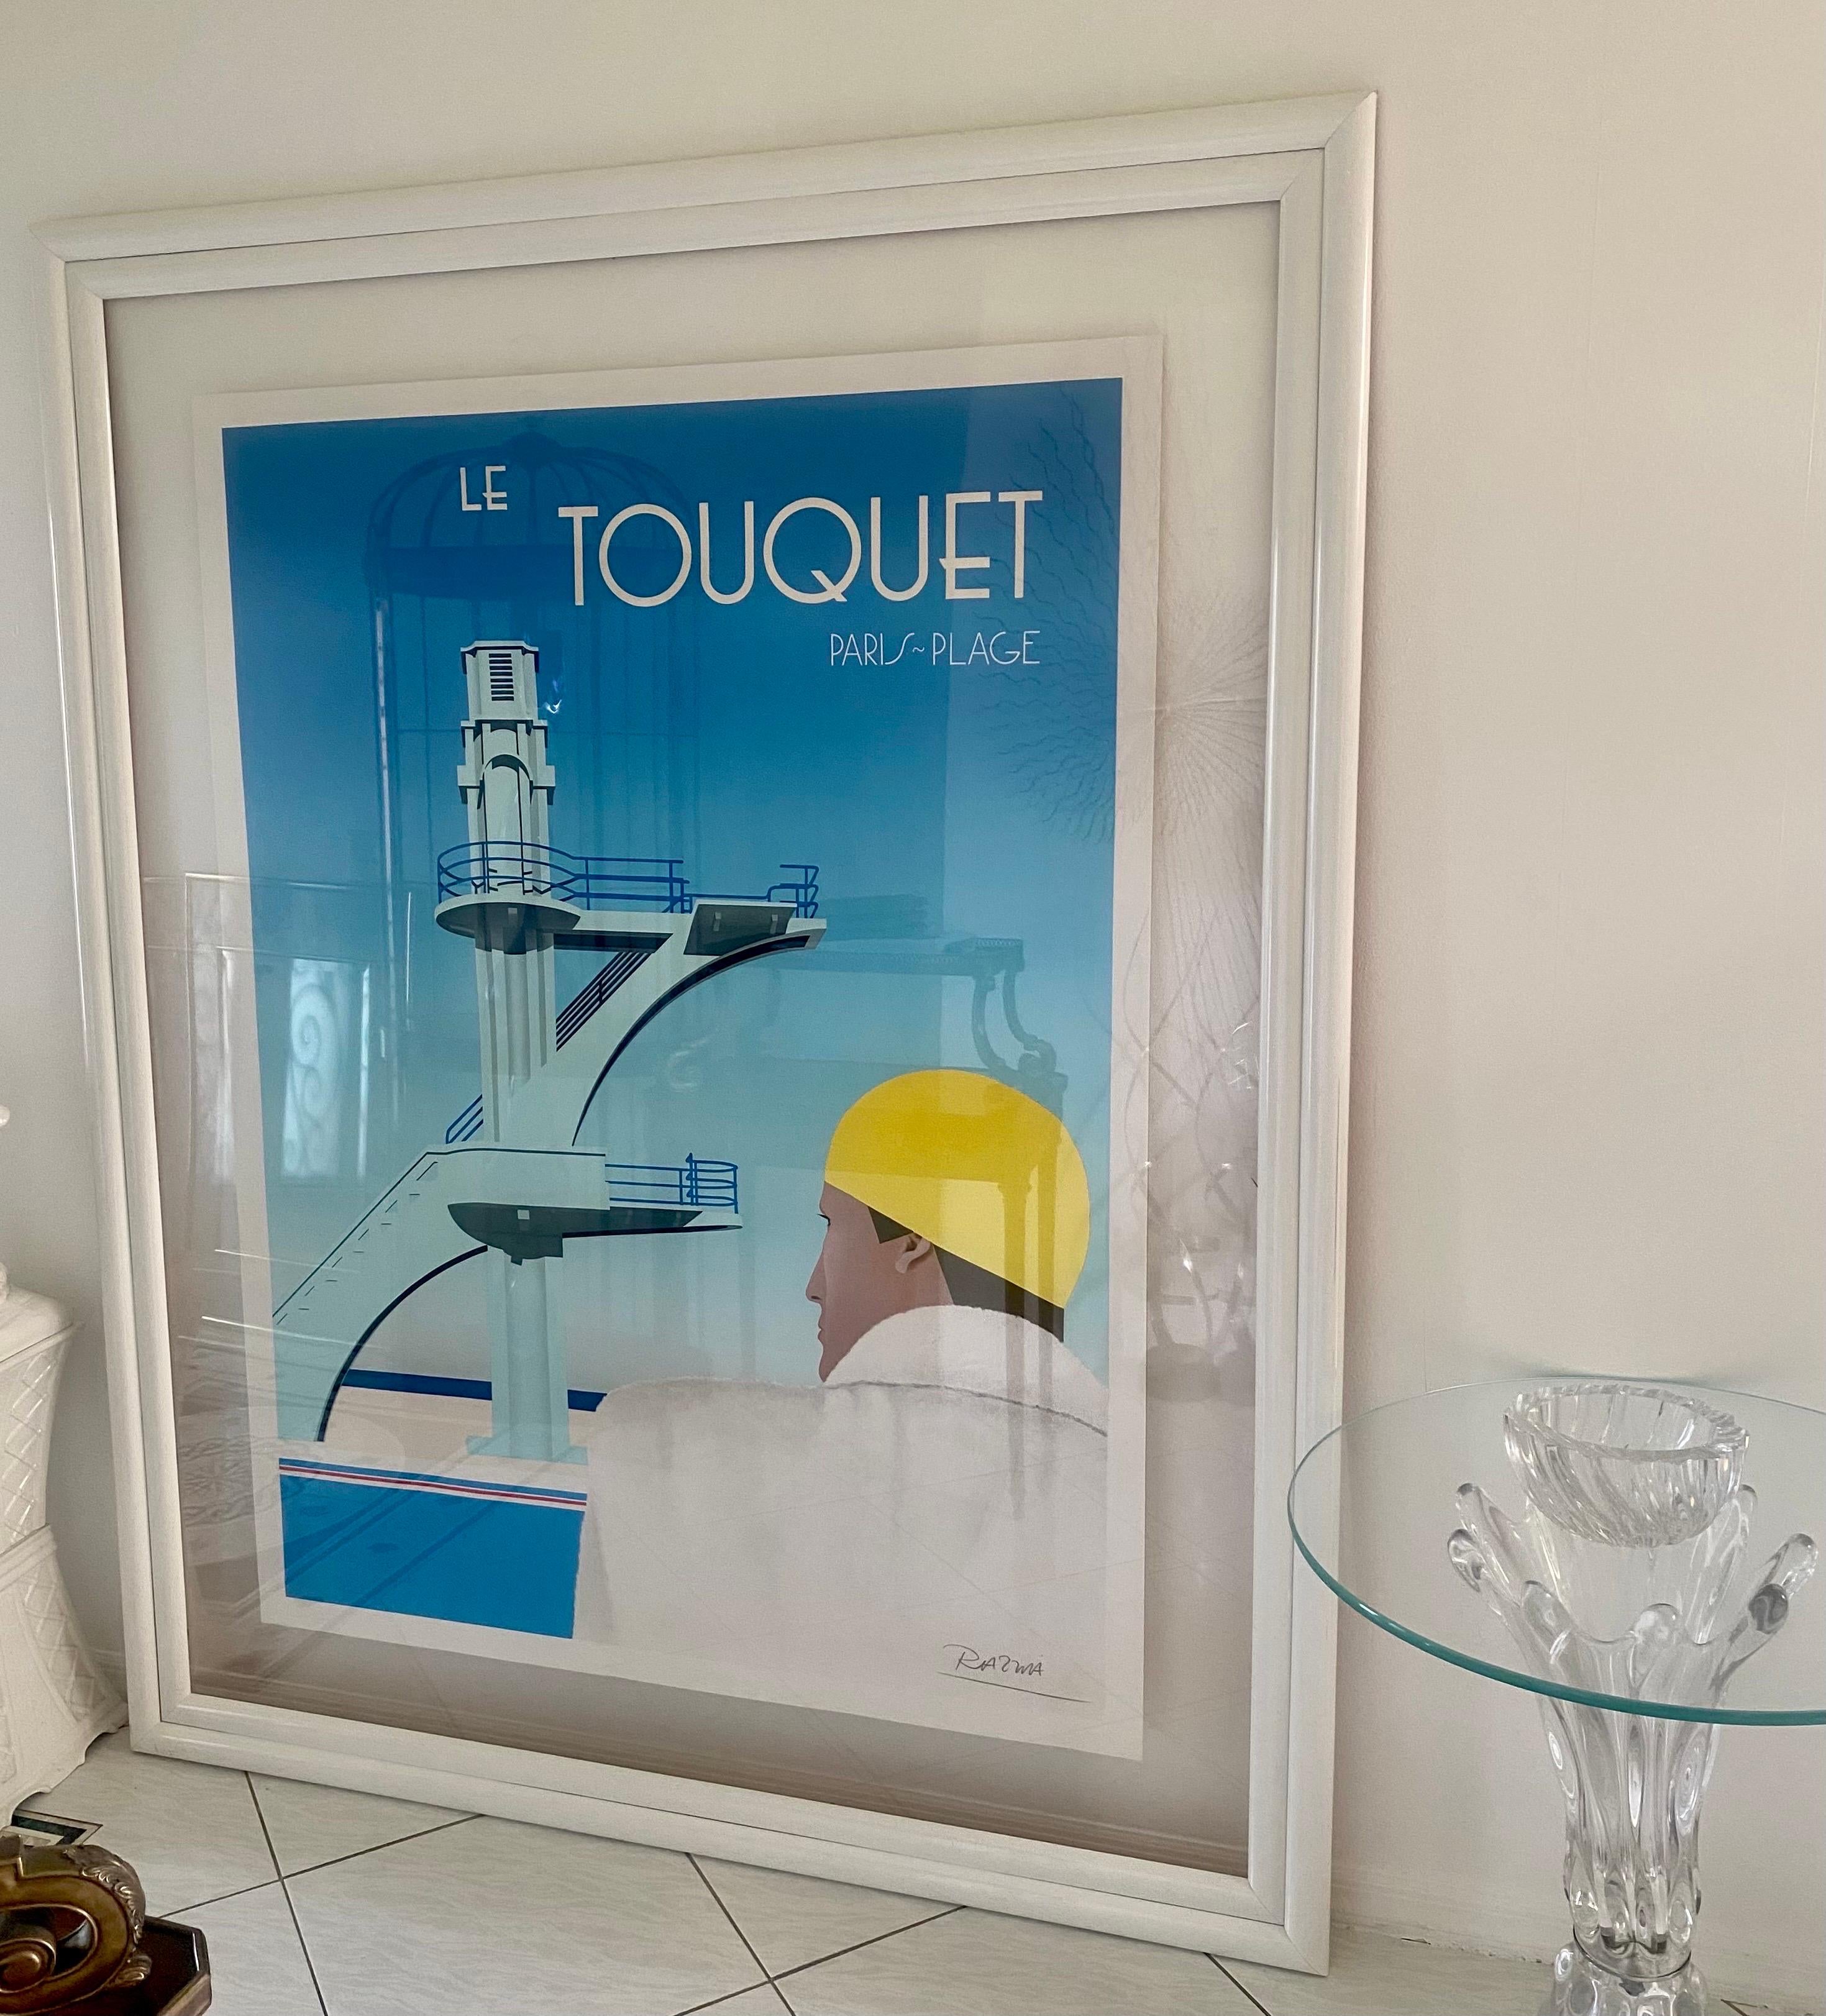 Original hand signed oster for Le Touquet Paris Plage dating from 1984 by Razzia, Gerard Courbouleix Deneriaz b. 1950.

Le Touquet Paris Plage is a French seaside resort located on the Opal Coast, on the edge of the English Channel. Le Touquet’s